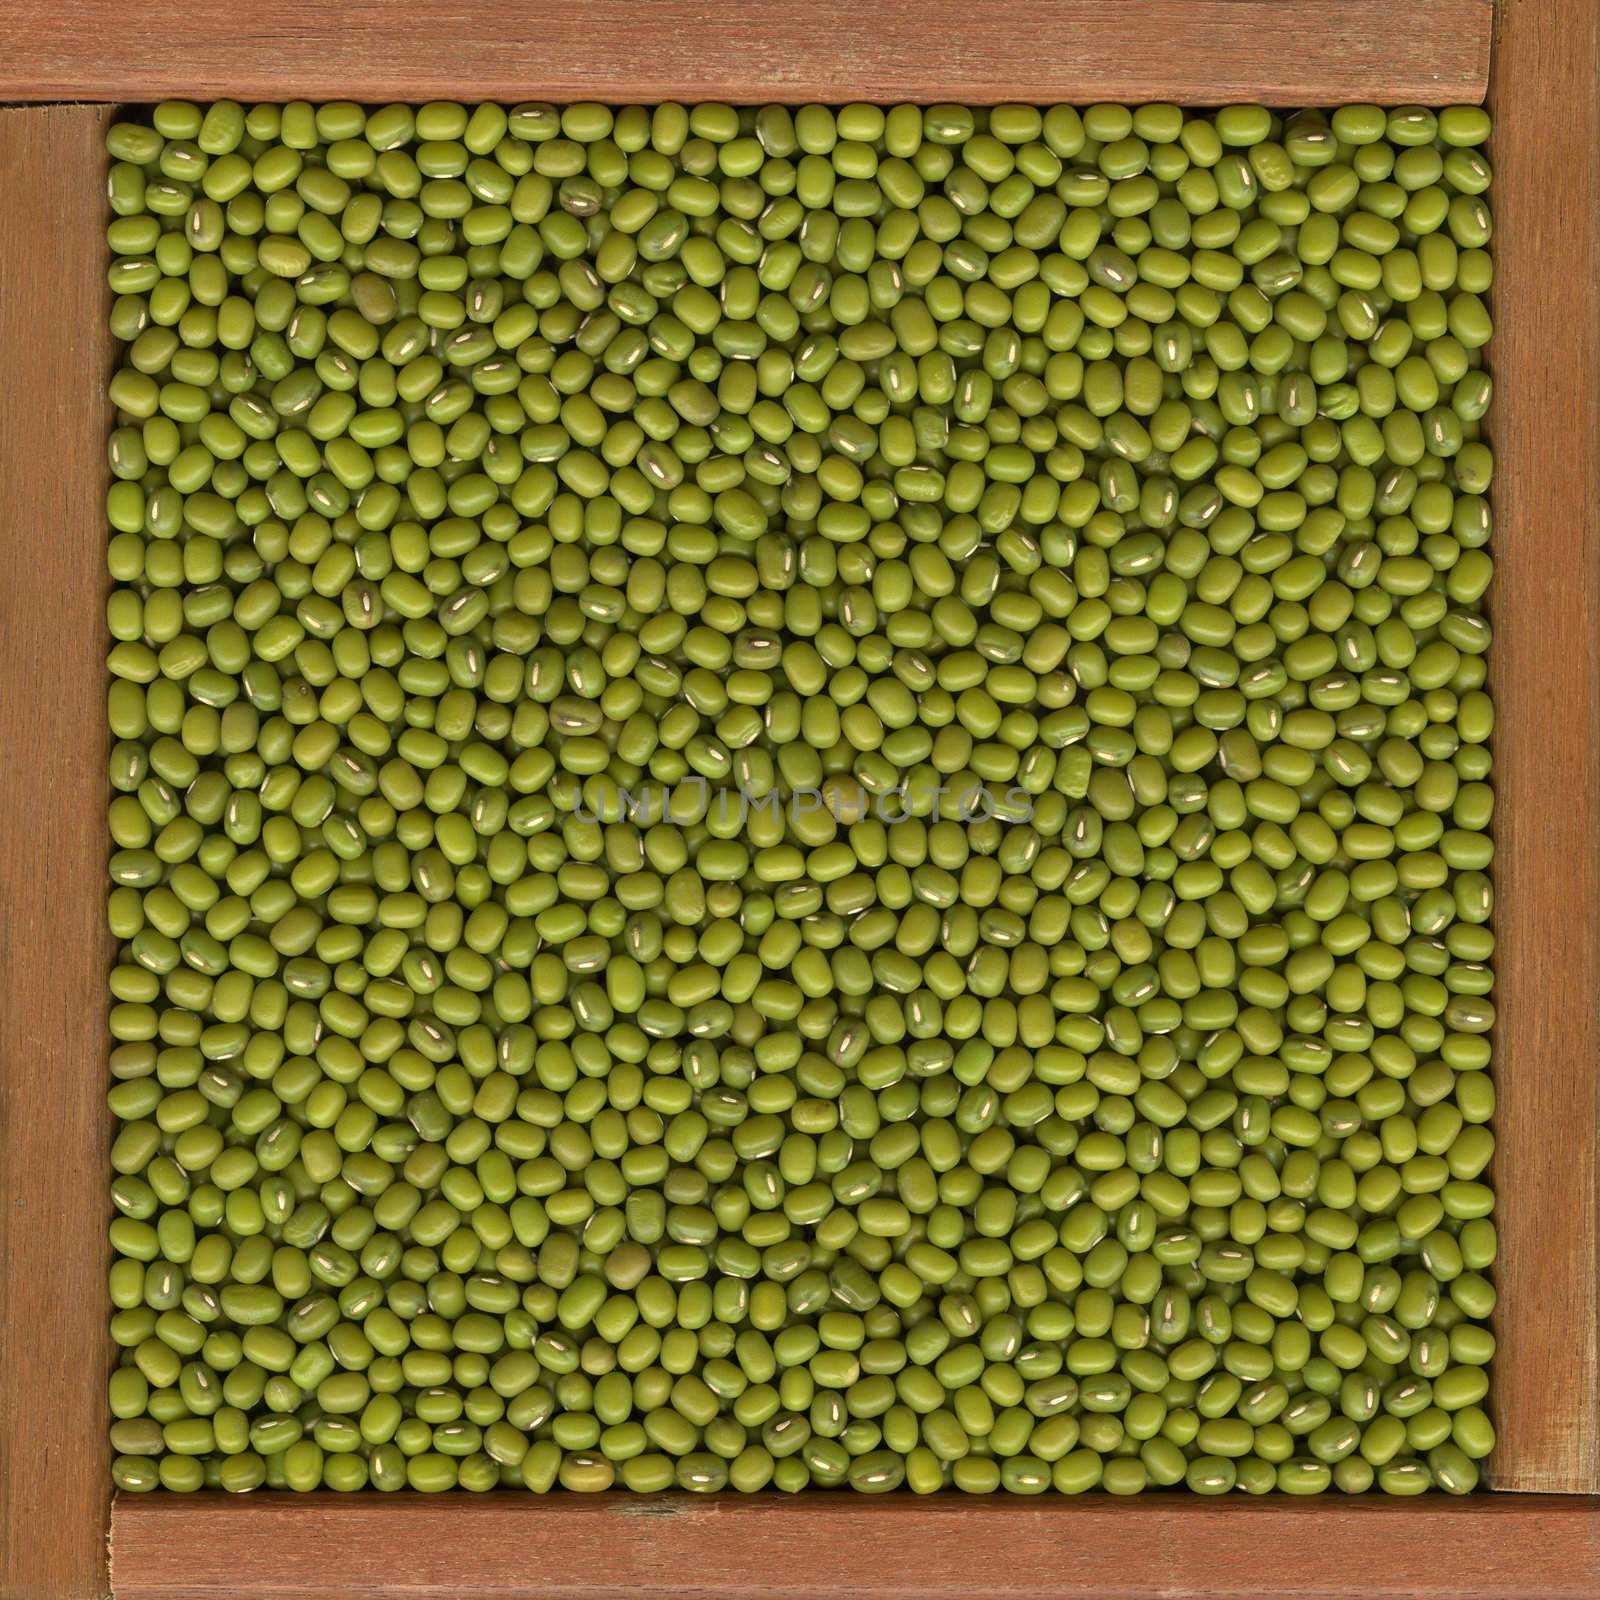 mung beans  background in a primitive, wooden frame or box